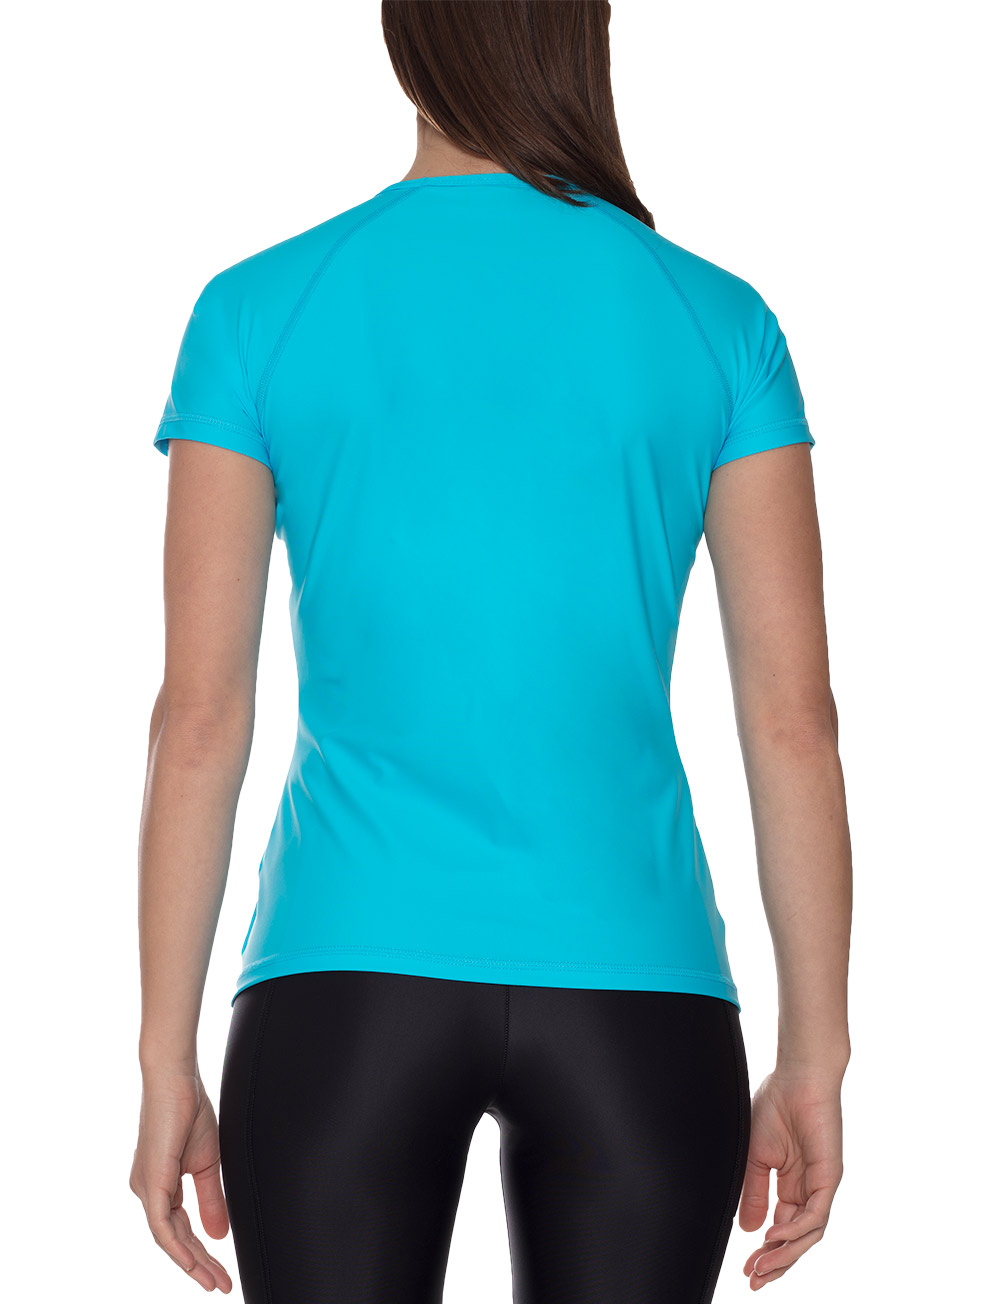 UV Shirt Loose Fit Ladies Holiday and Leisure